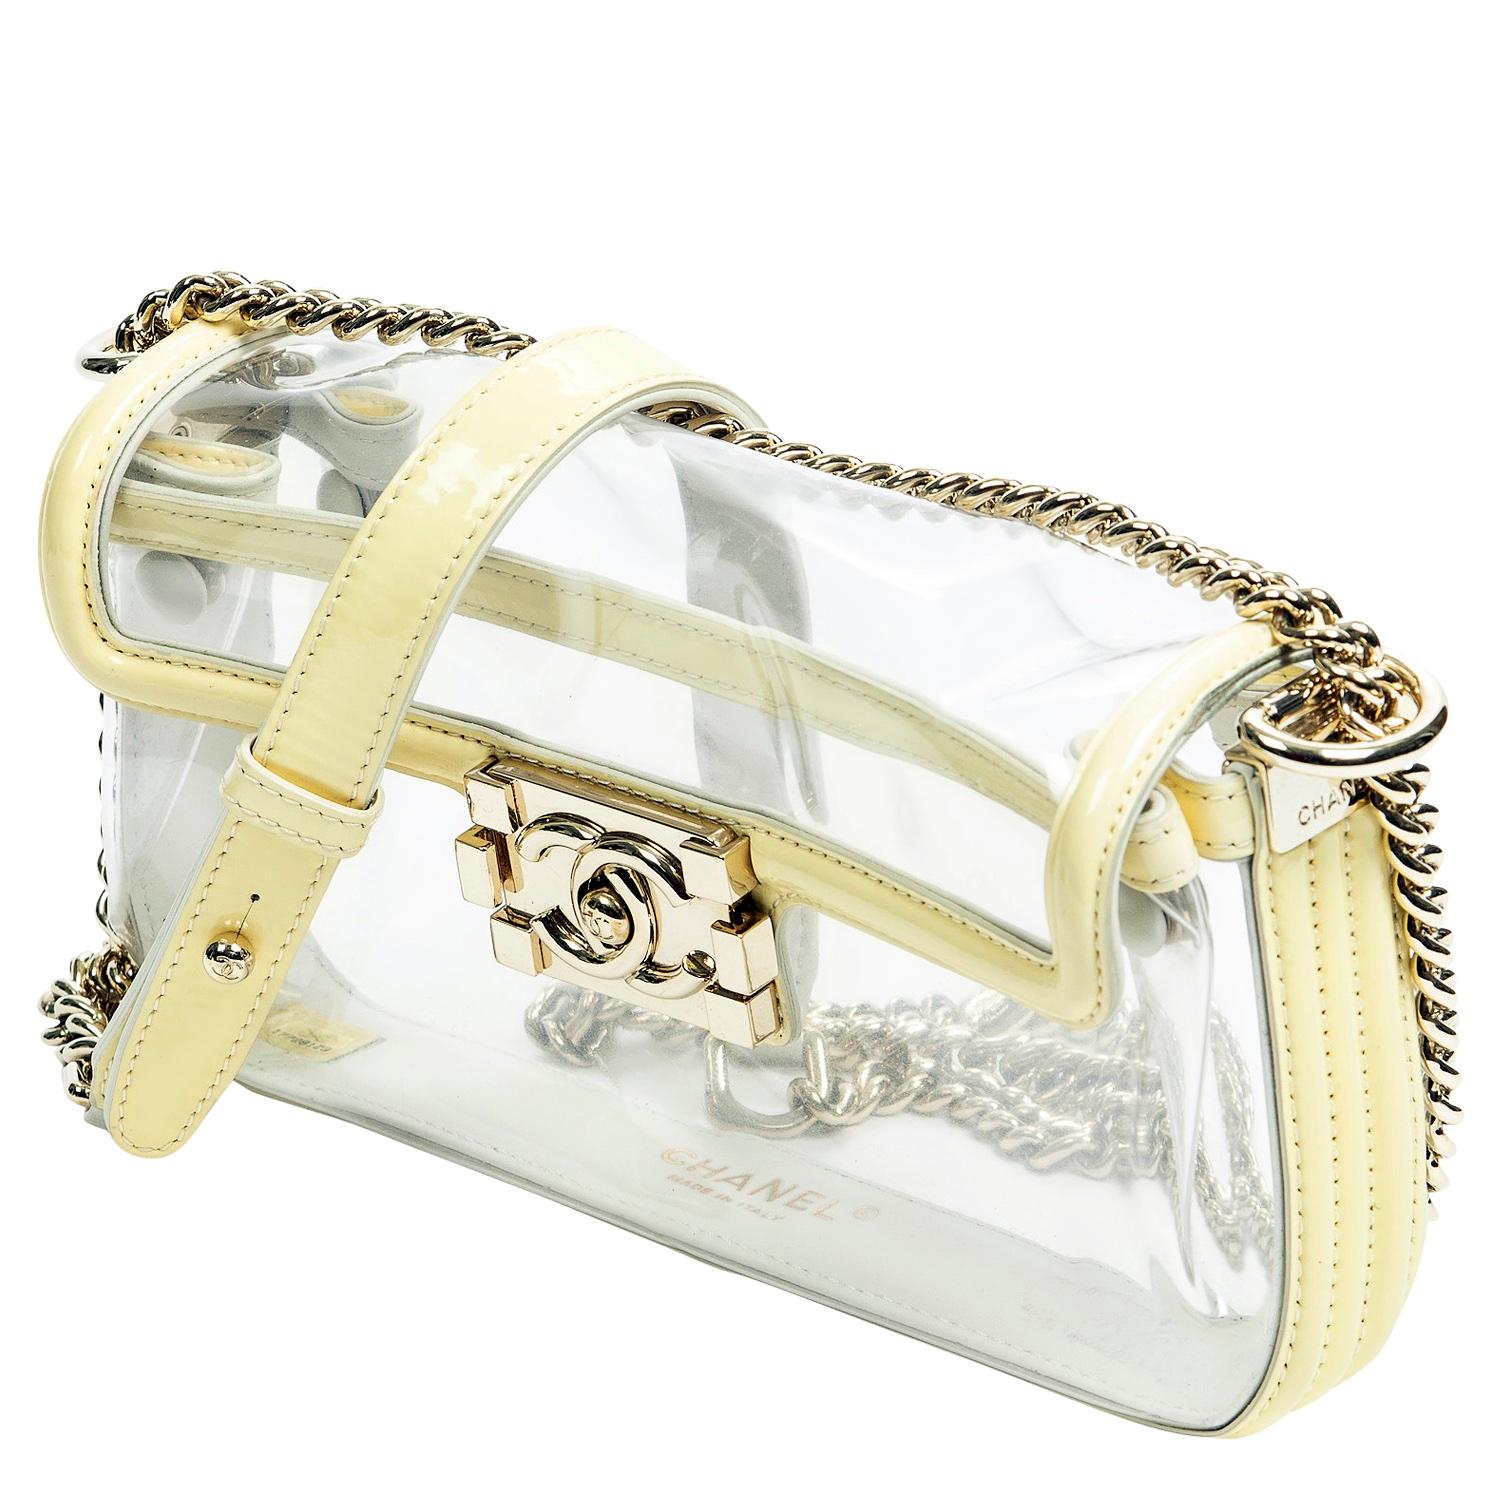 Super cute Chanel from 2012 crafted in PVC and pastel yellow leather trimming. We love the gold-tone hardware against the yellow and clear – it all works so well together. The CC pinch-lock closure opens up to a PVC interior. Dress her up or down as